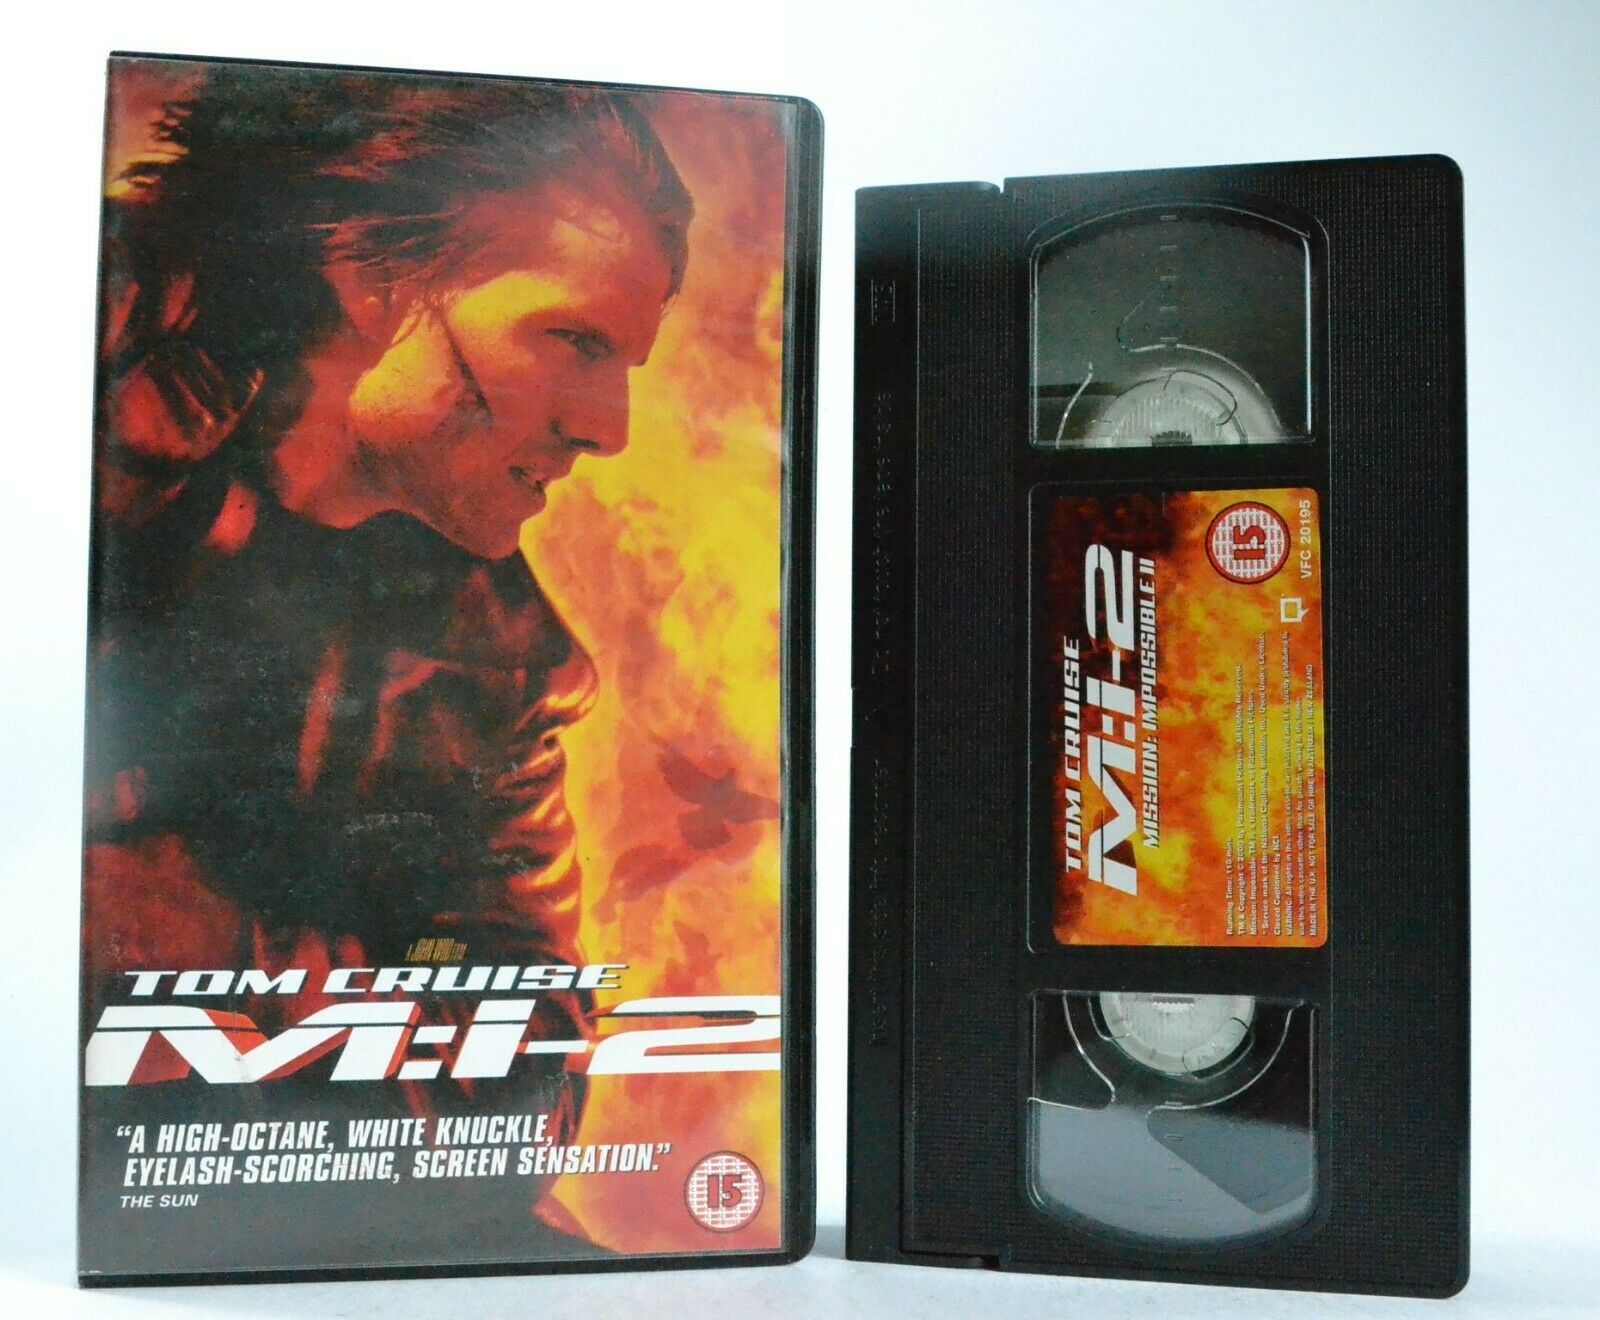 M:I-2 (Mission: Impossible 2): A J.Woo Film (2000) - Spy Action - T.Cruise - VHS-